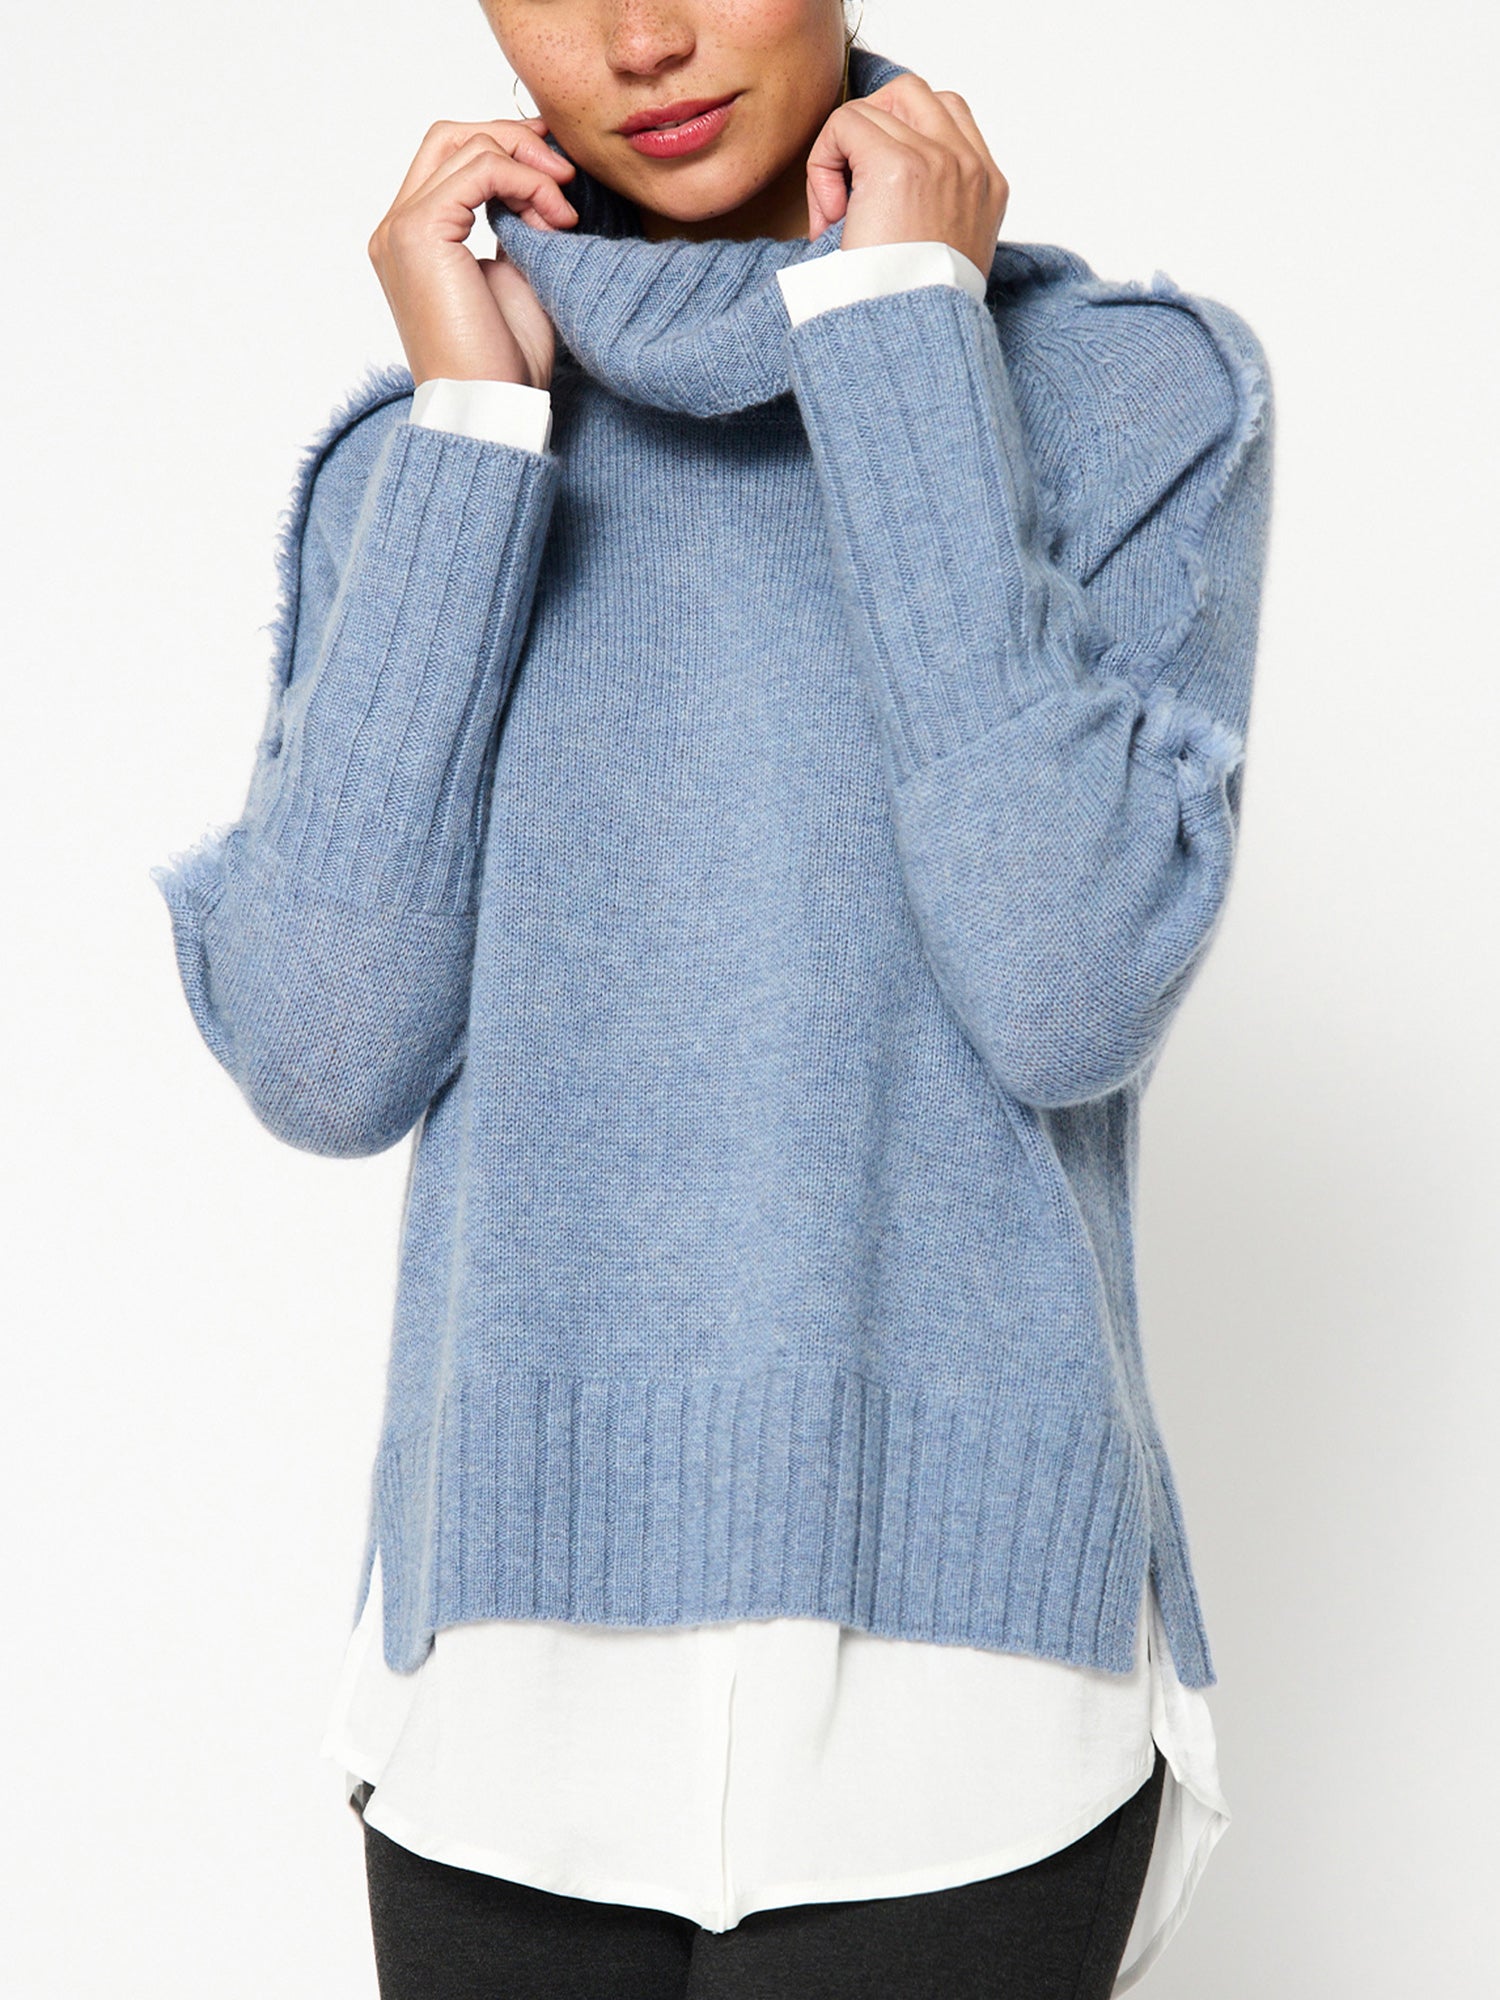 Jolie blue layered turtleneck sweater front view 2